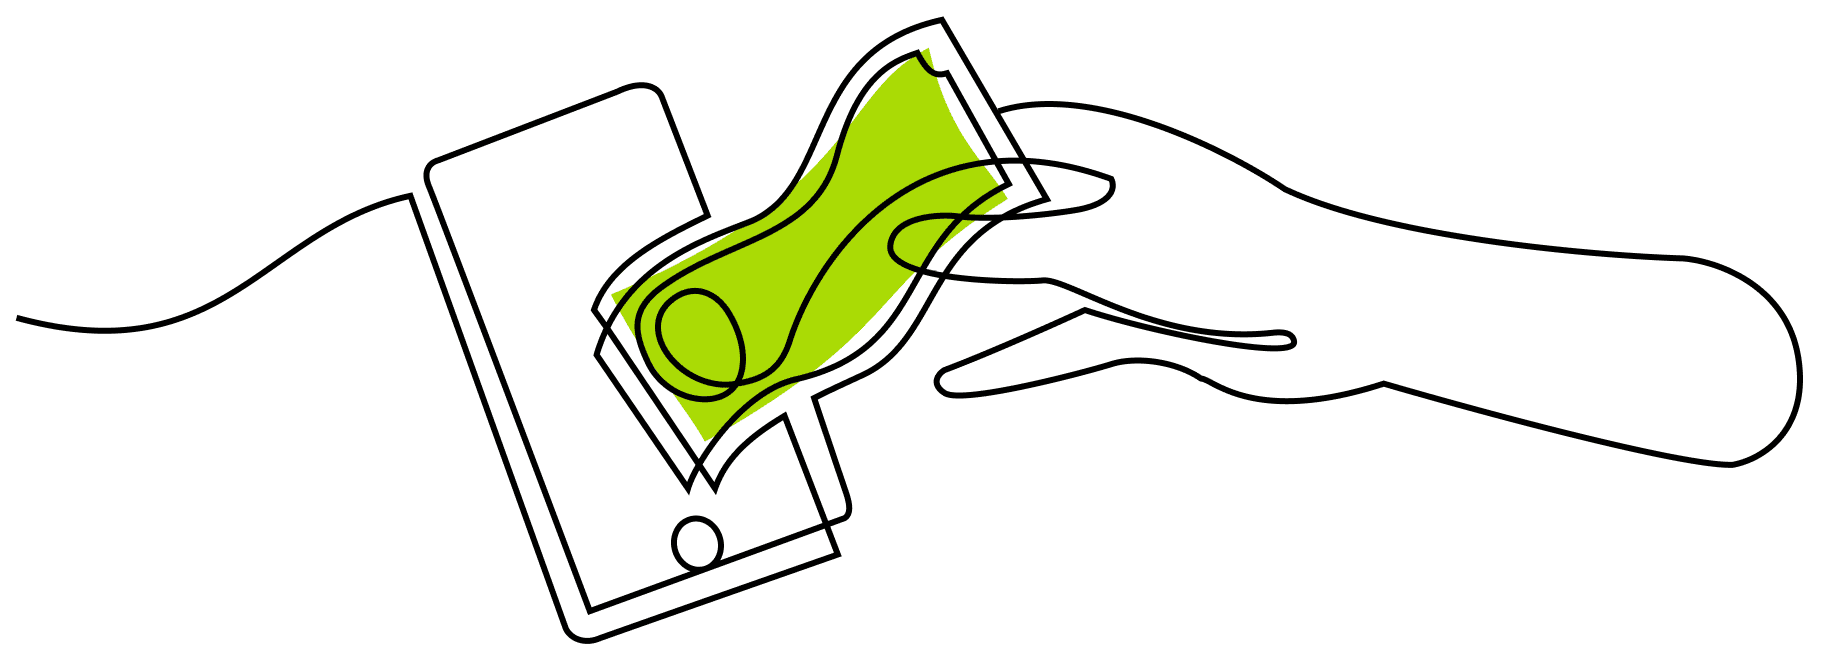 An illustration of a hand pulling money from a mobile device using a single contiguous line